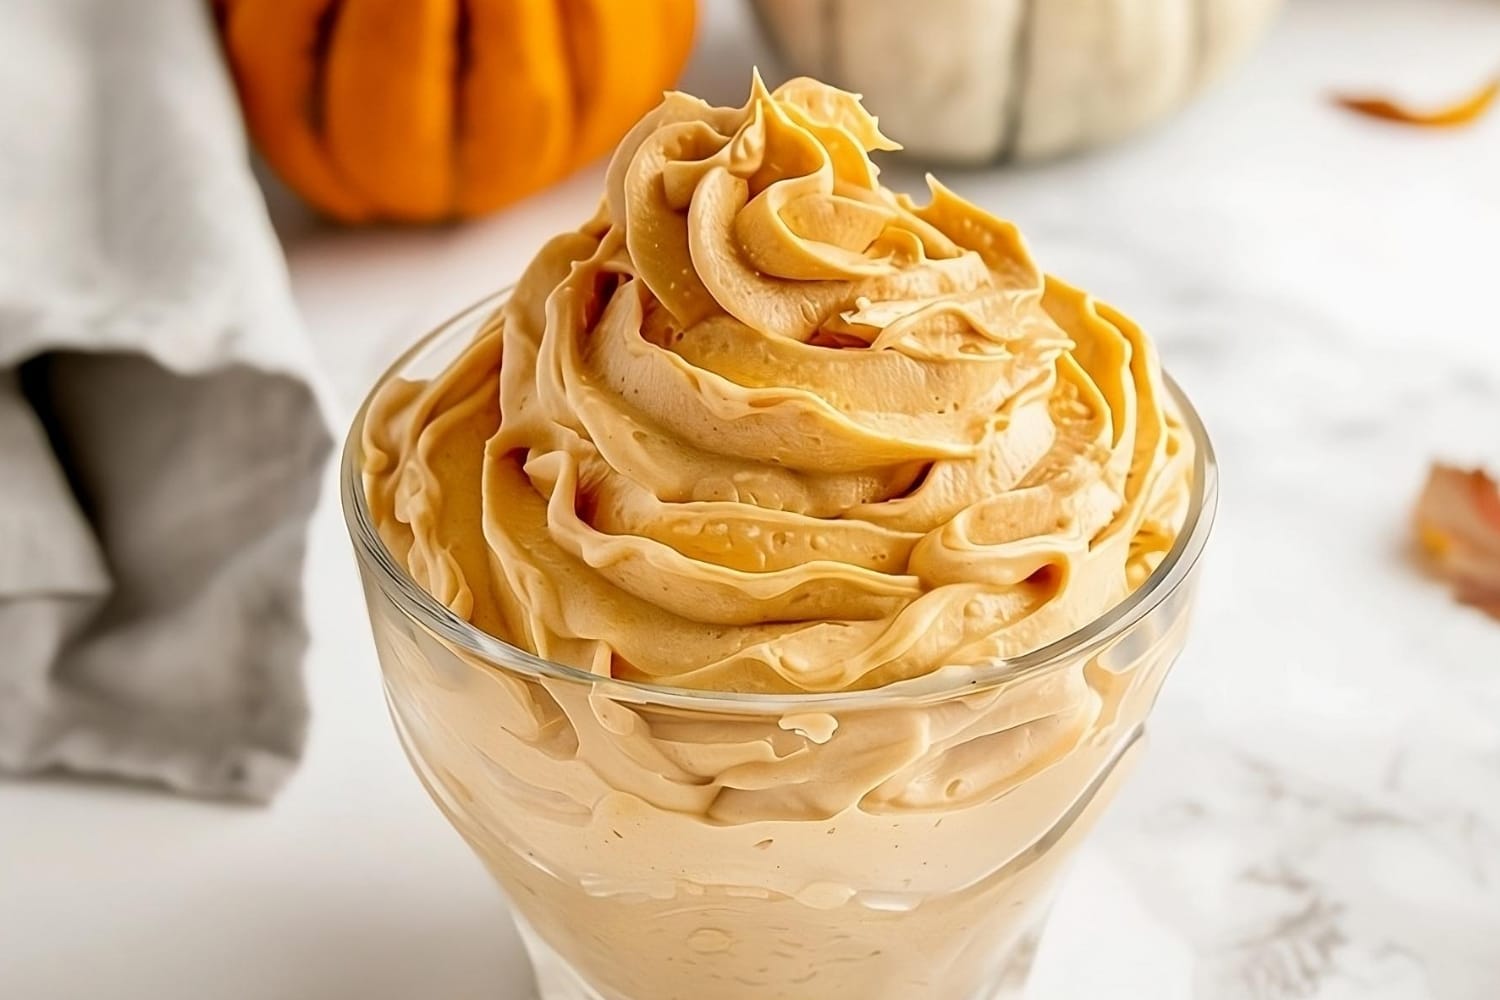 Pumpkin whipped cream in a small glass bowl.